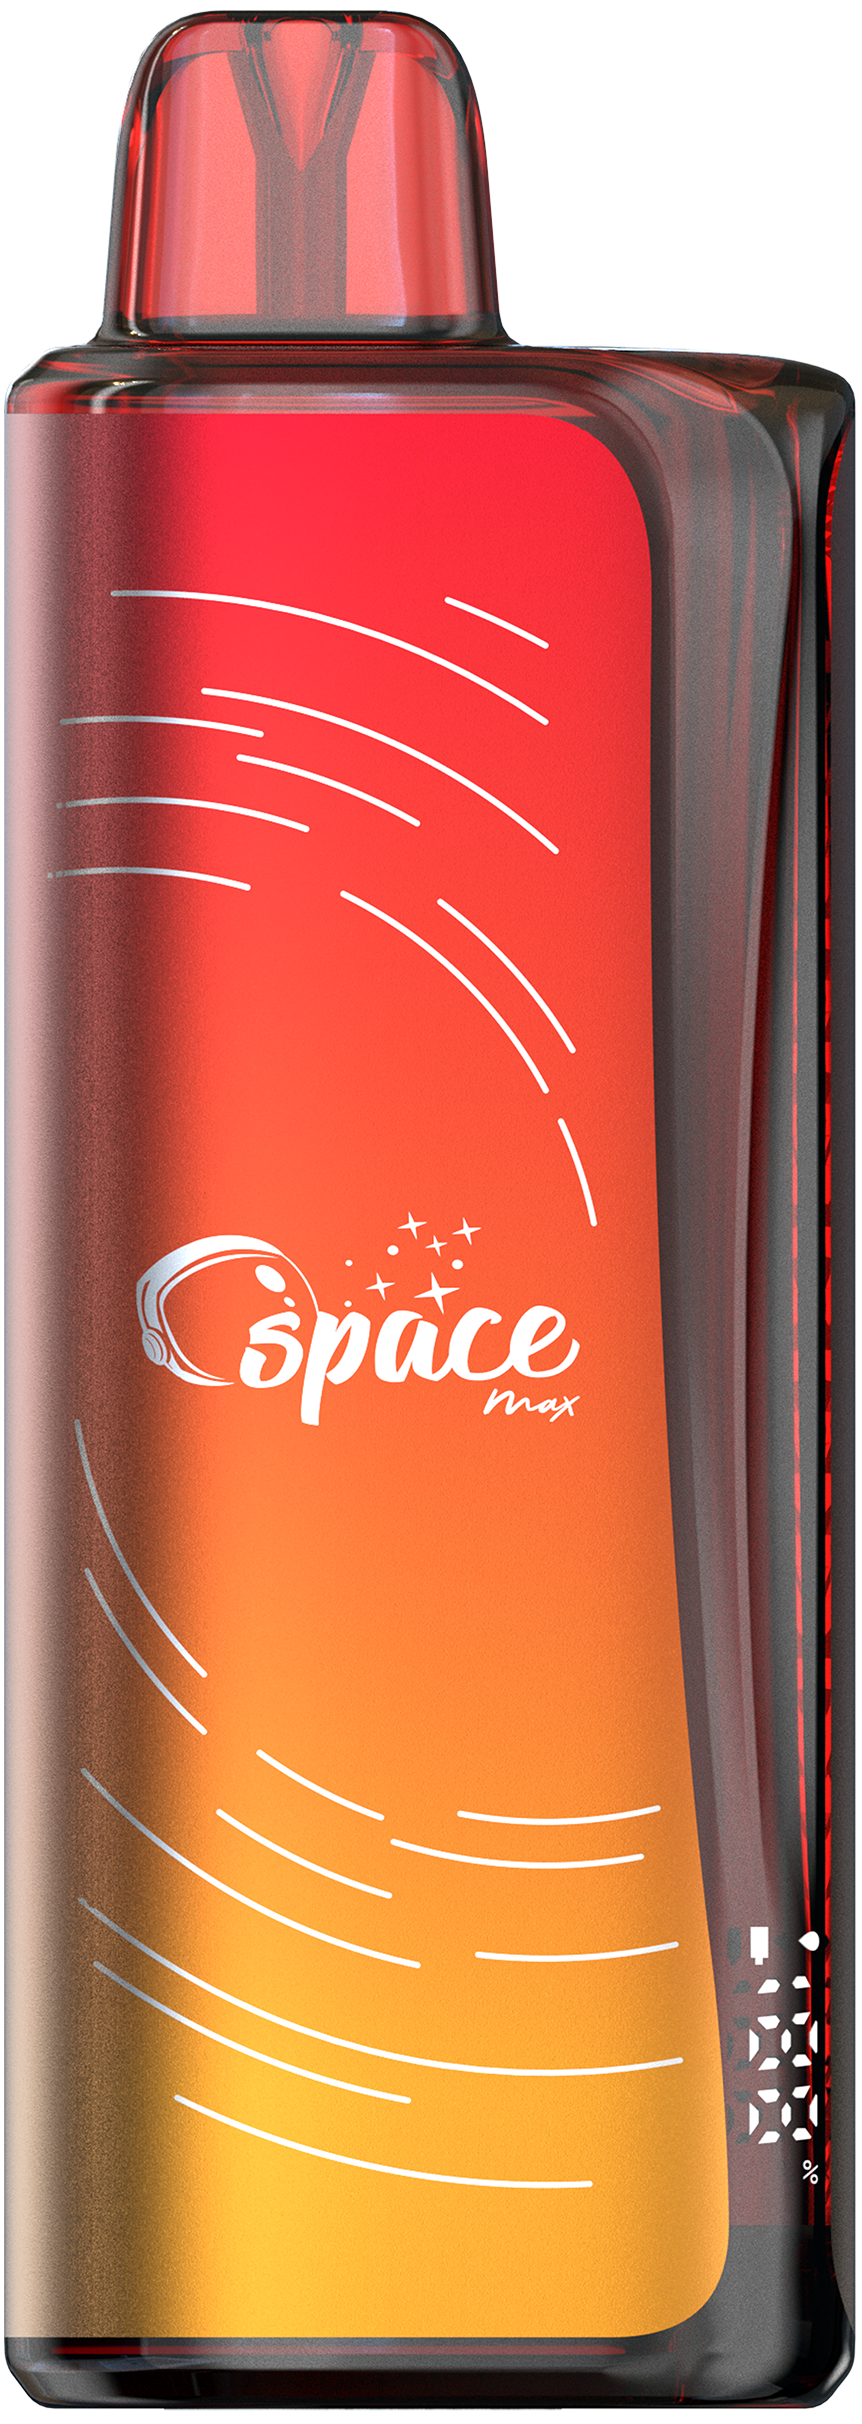 Yummy Space Max BX8000 Disposable Vape